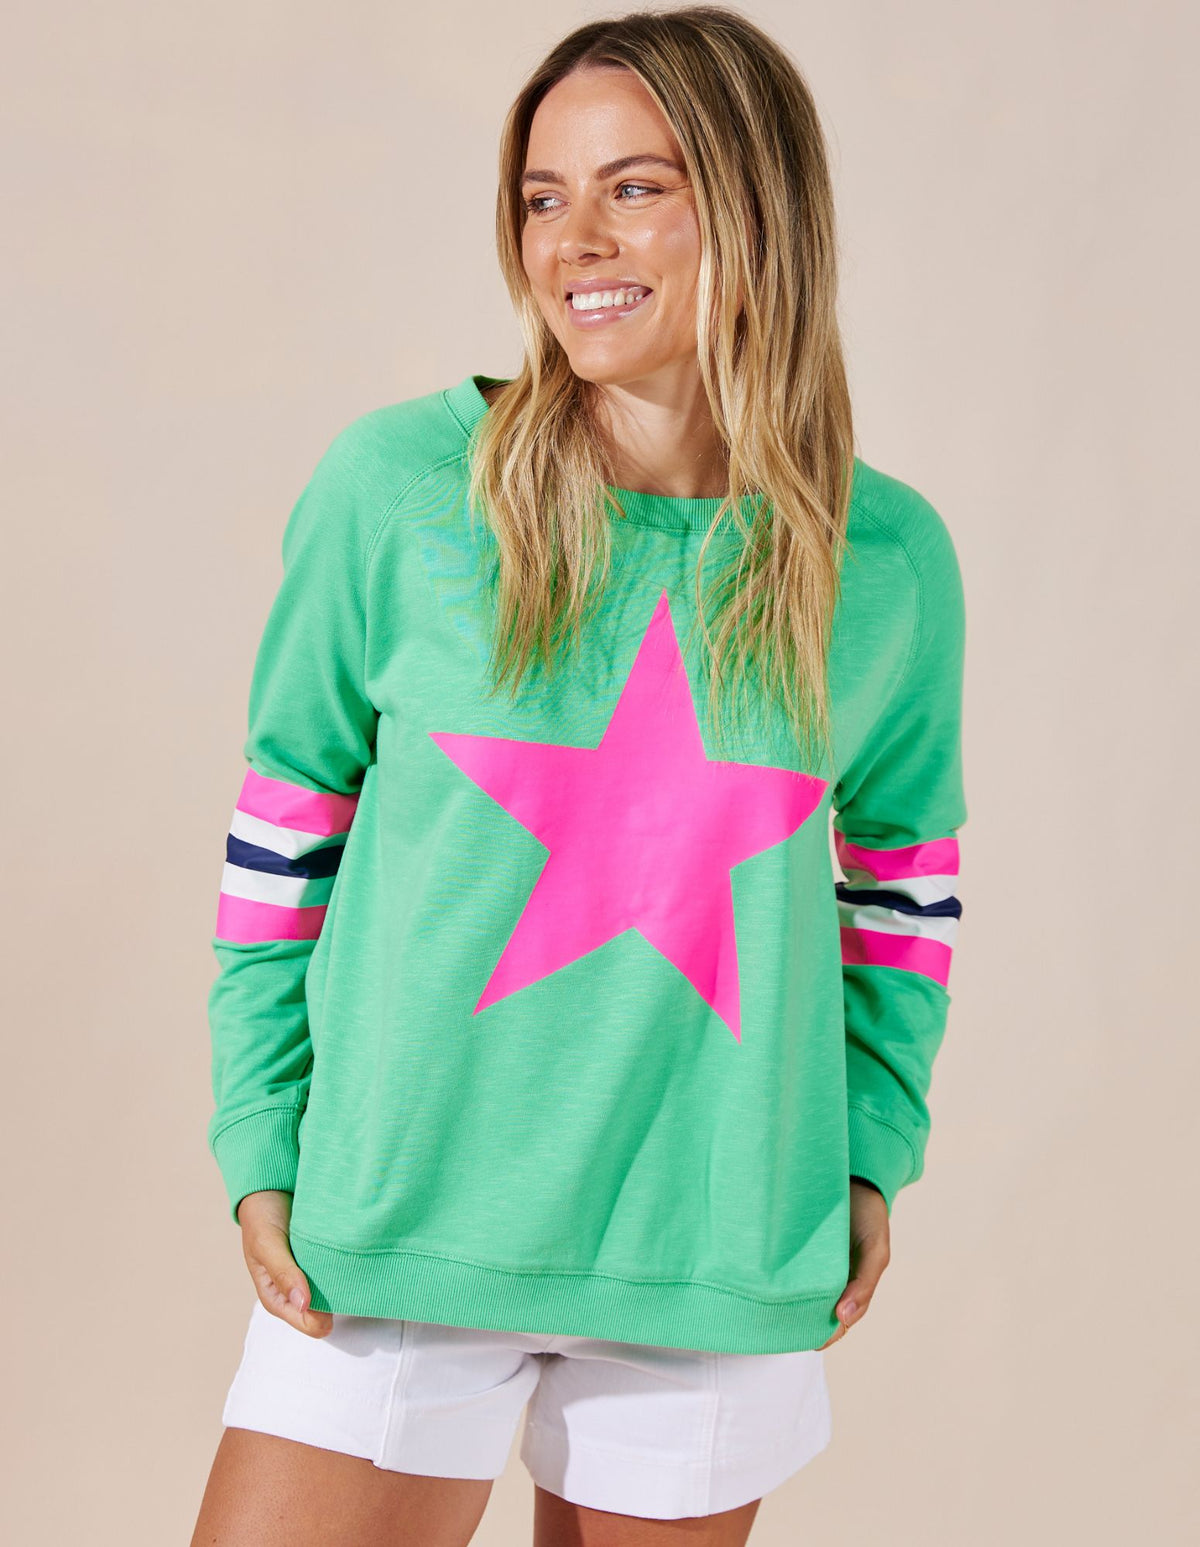 Holiday Sweater - Green/Pink Star - Jovie The Label